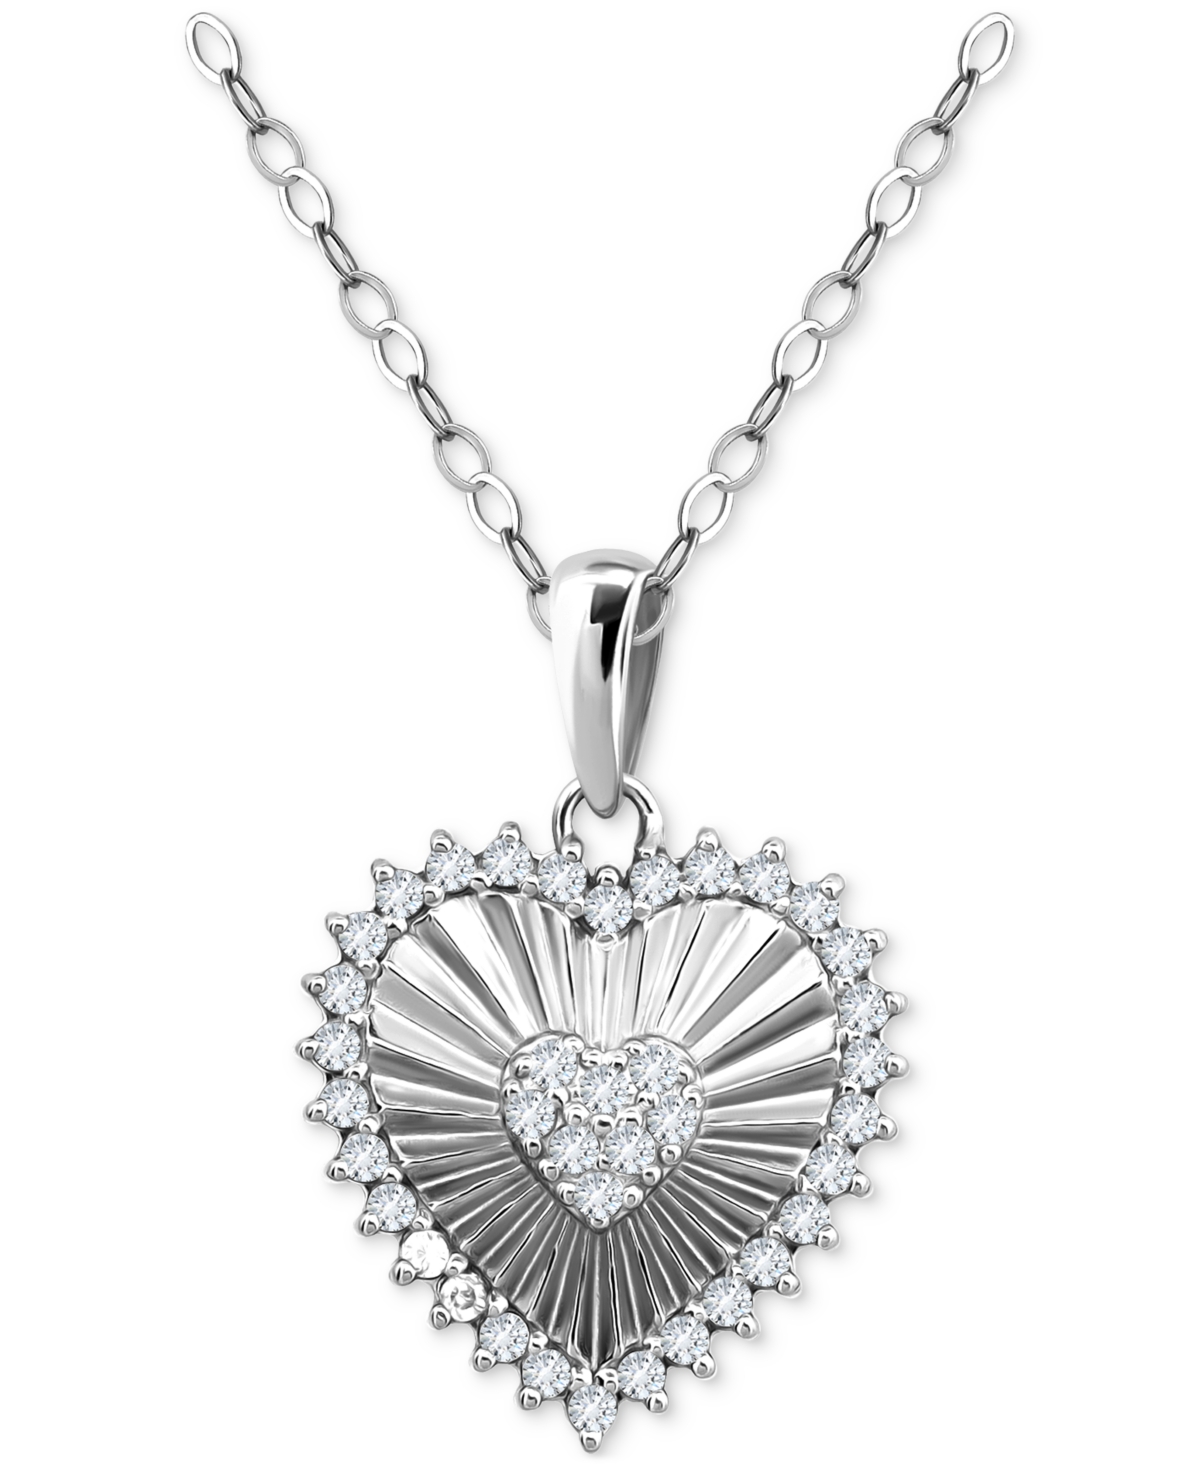 Giani Bernini Cubic Zirconia Textured Heart Pendant Necklace In Sterling Silver, 16" + 2" Extender, Created For Ma In Gold Over Silver